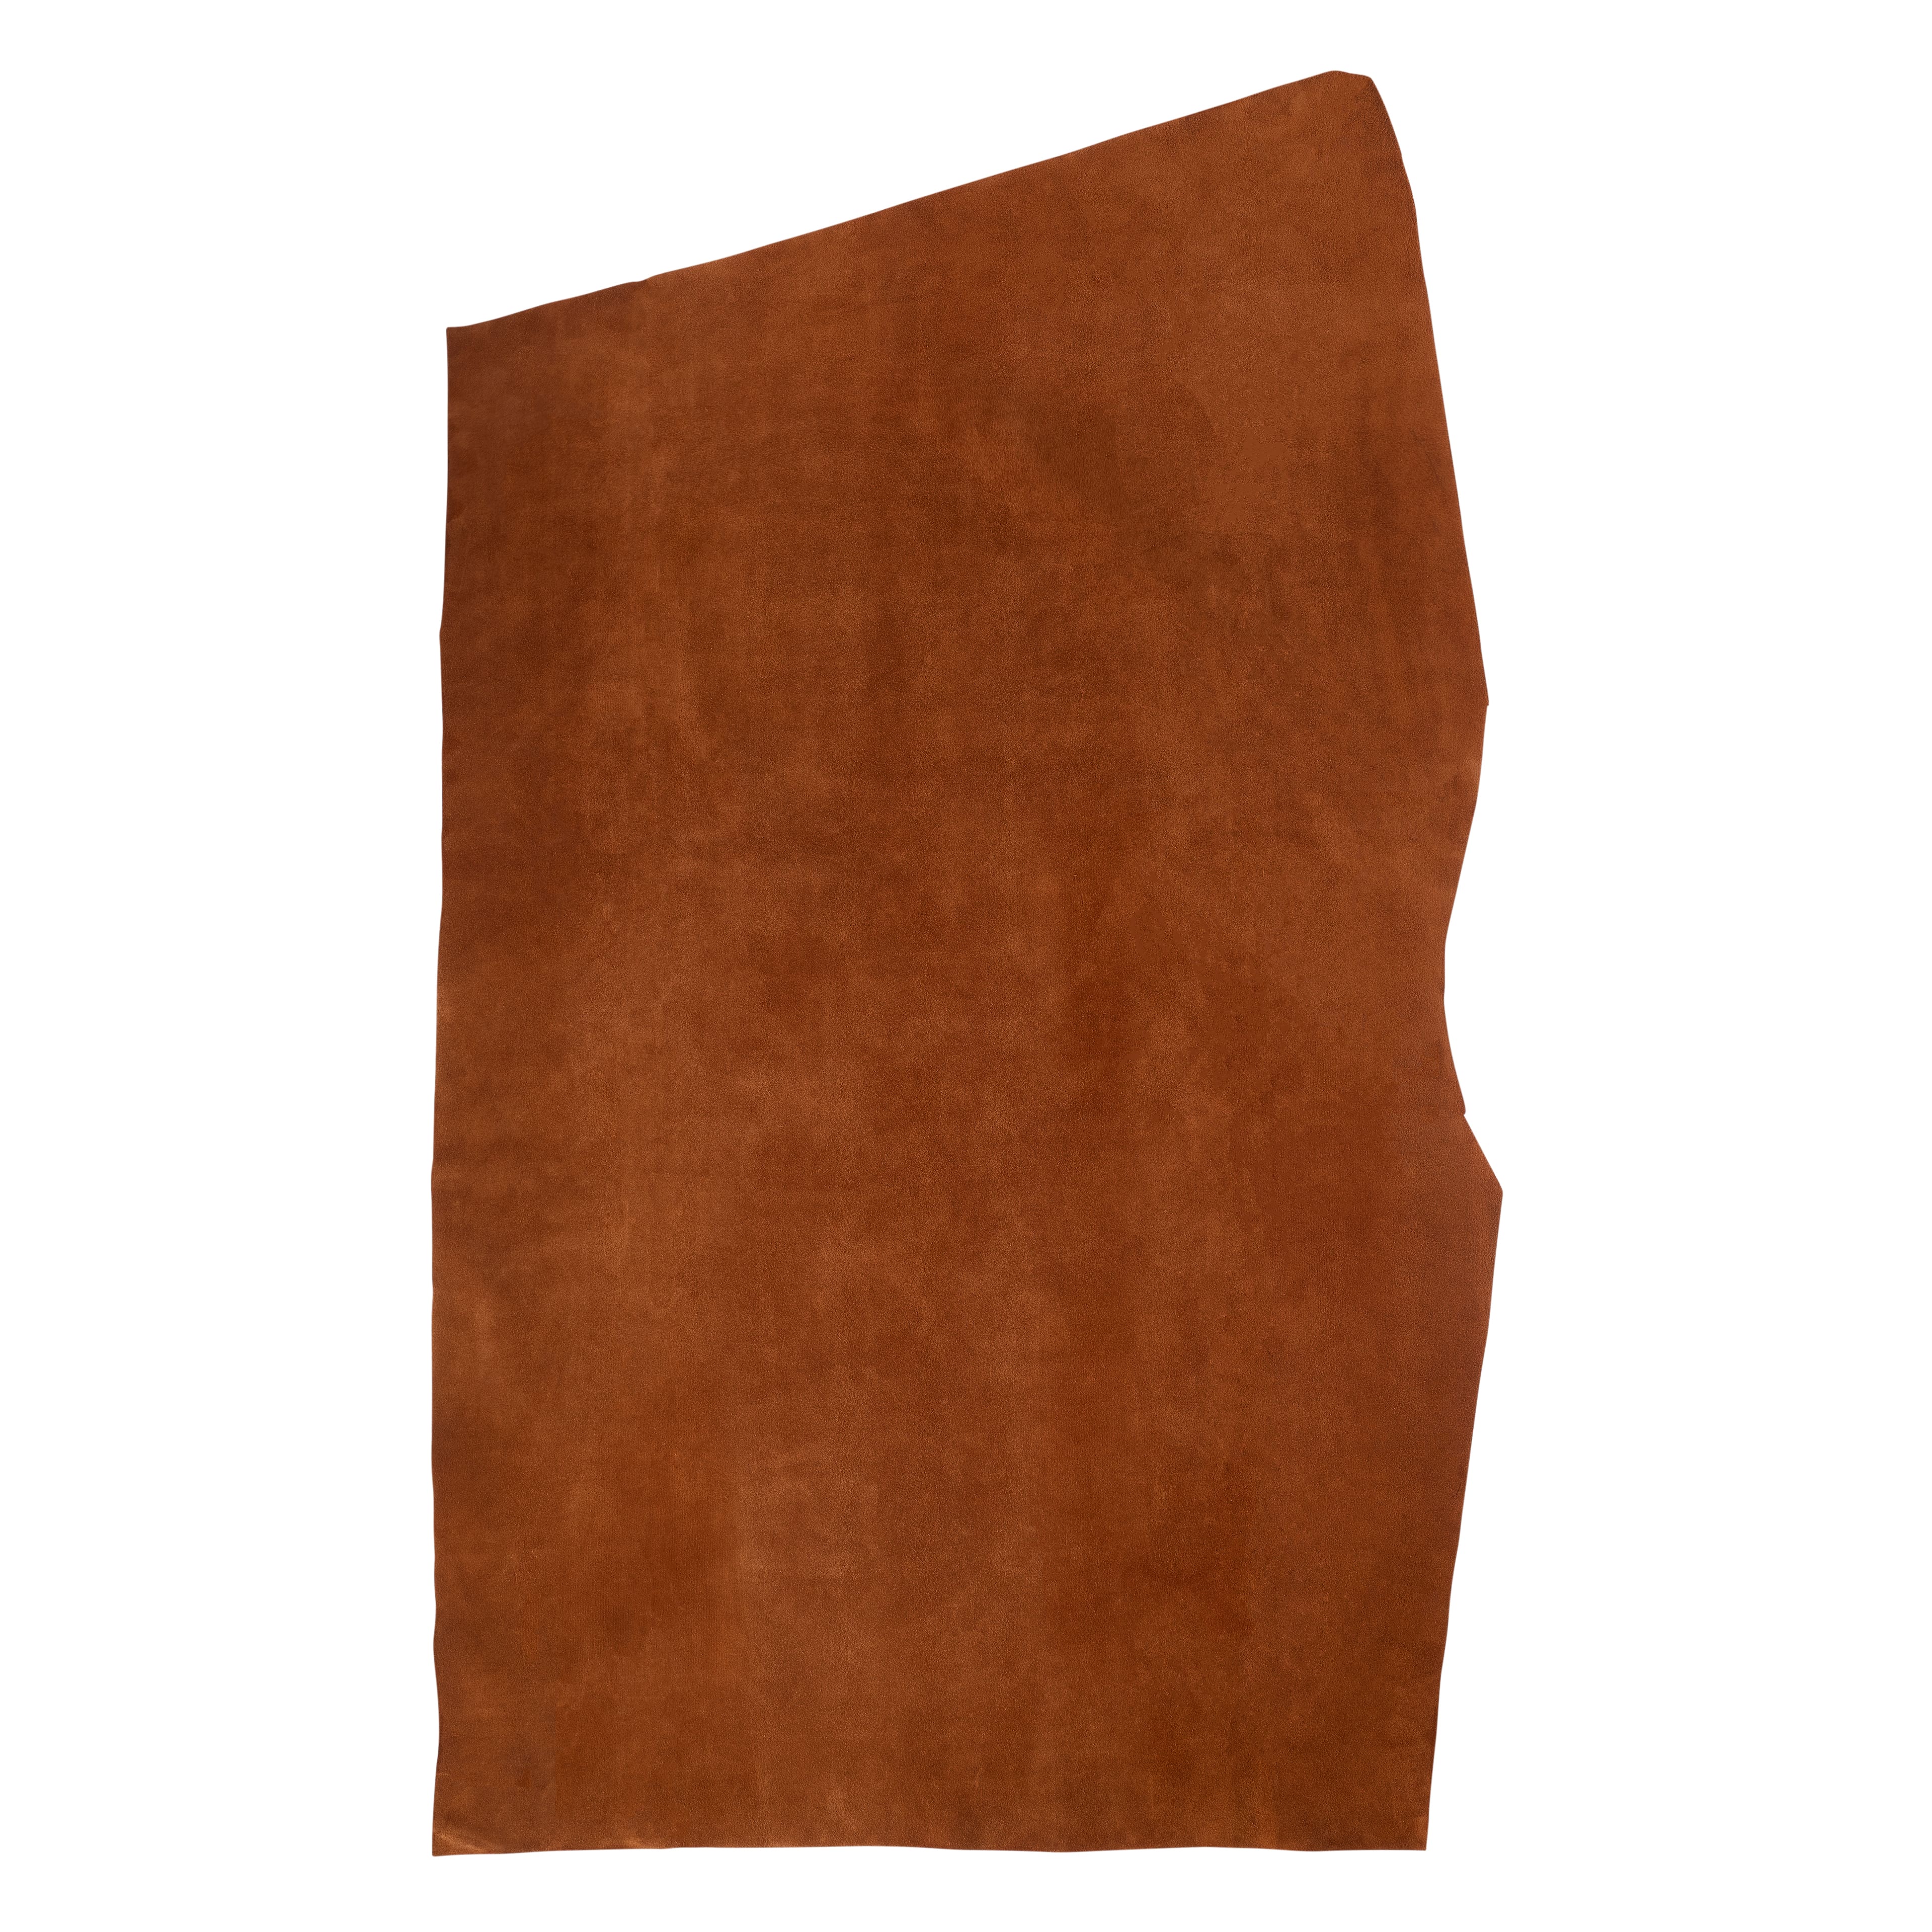 Brown Suede Split Leather by ArtMinds™